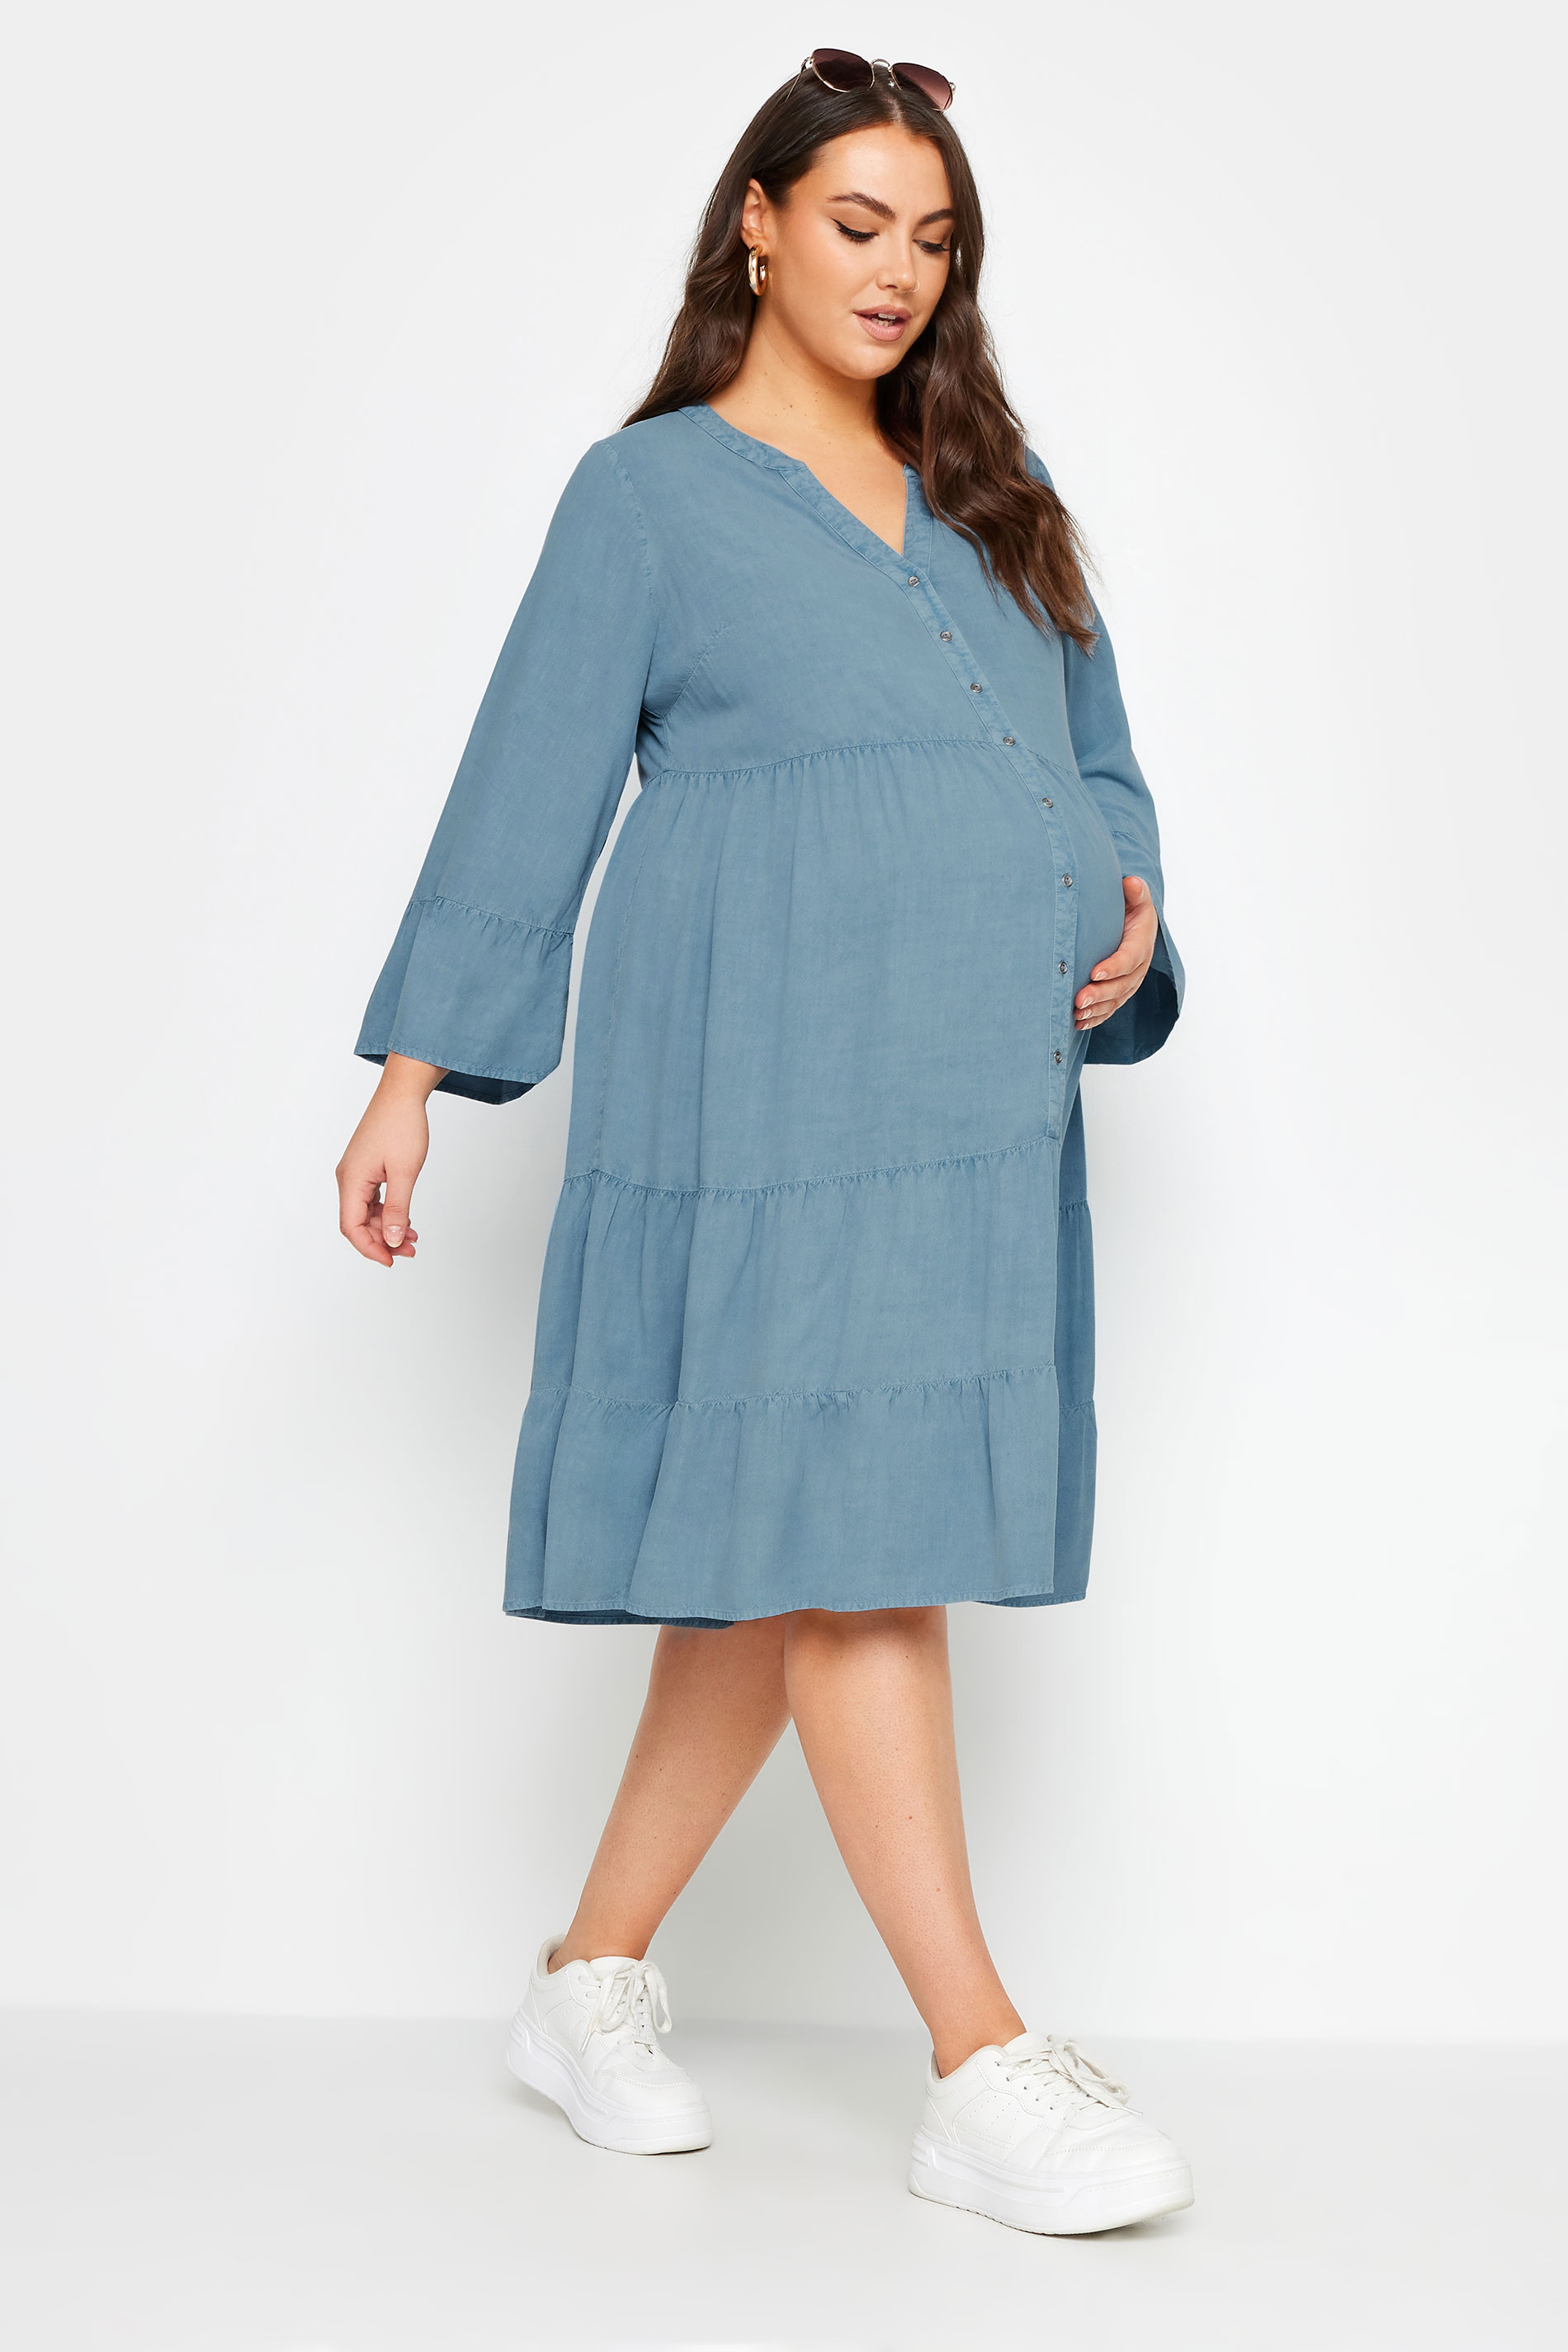 BUMP IT UP MATERNITY Plus Size Blue Tiered Midi Dress | Yours Clothing 2